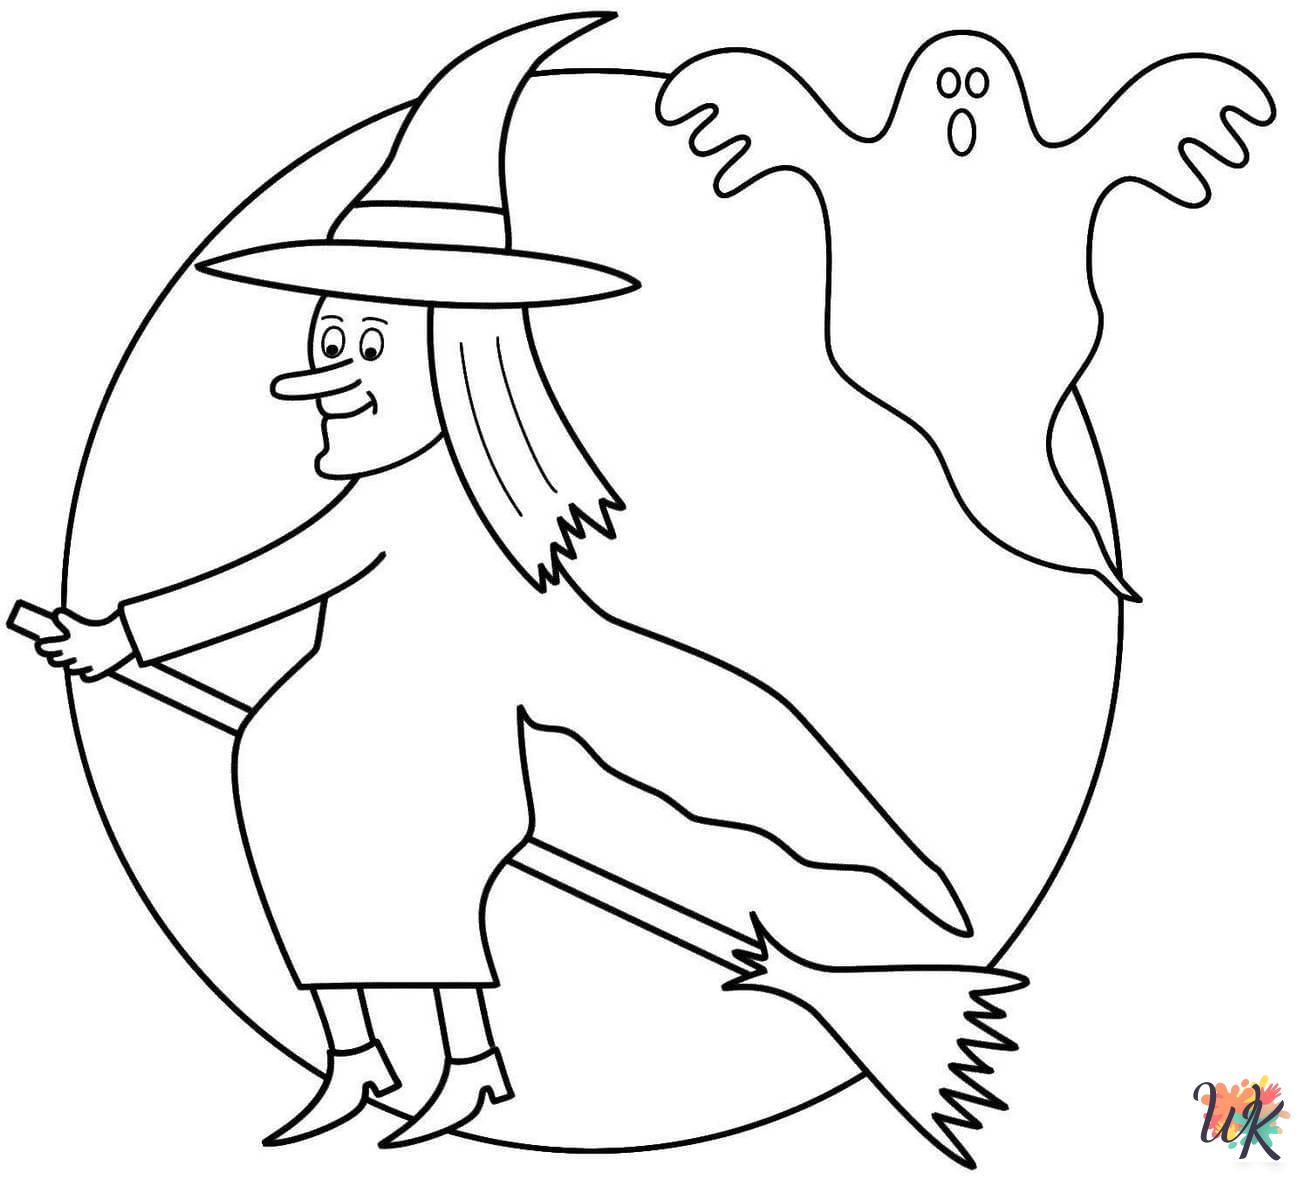 Witch decorations coloring pages